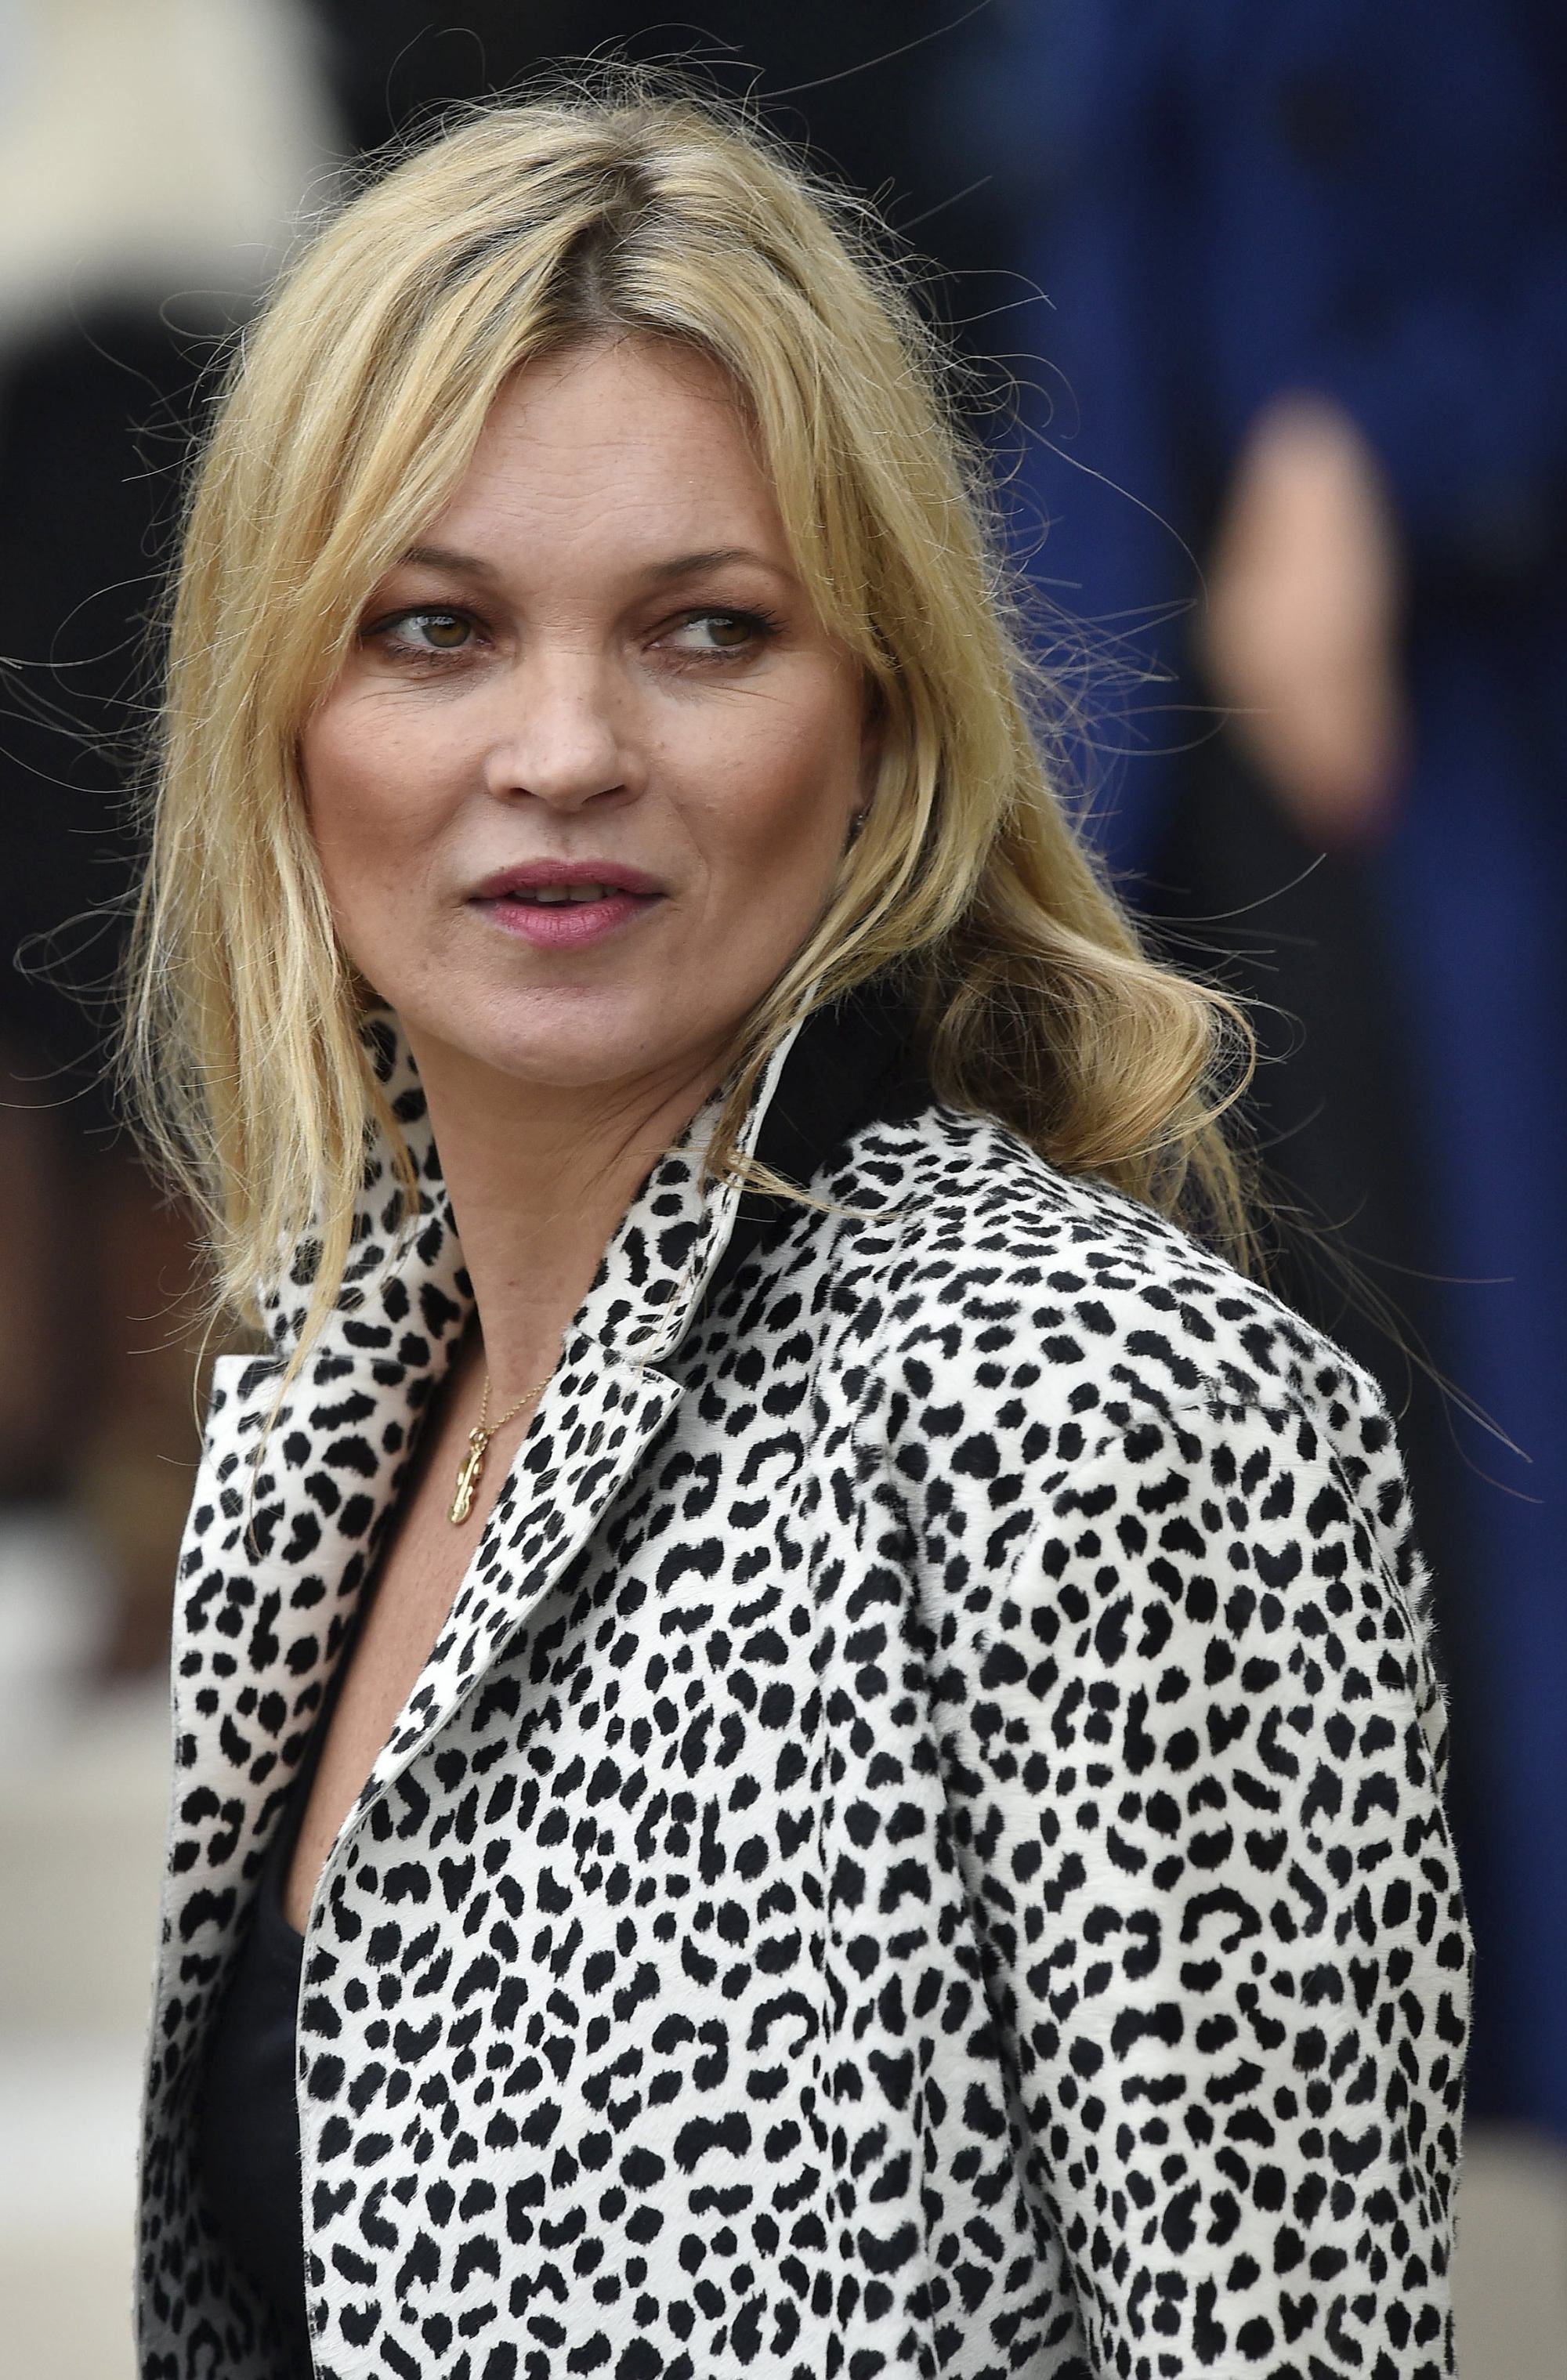 H&M, Burberry and Chanel all withdrew from campaigns with Kate Moss after controversial photos of her emerged in the press. Photo: Reuters